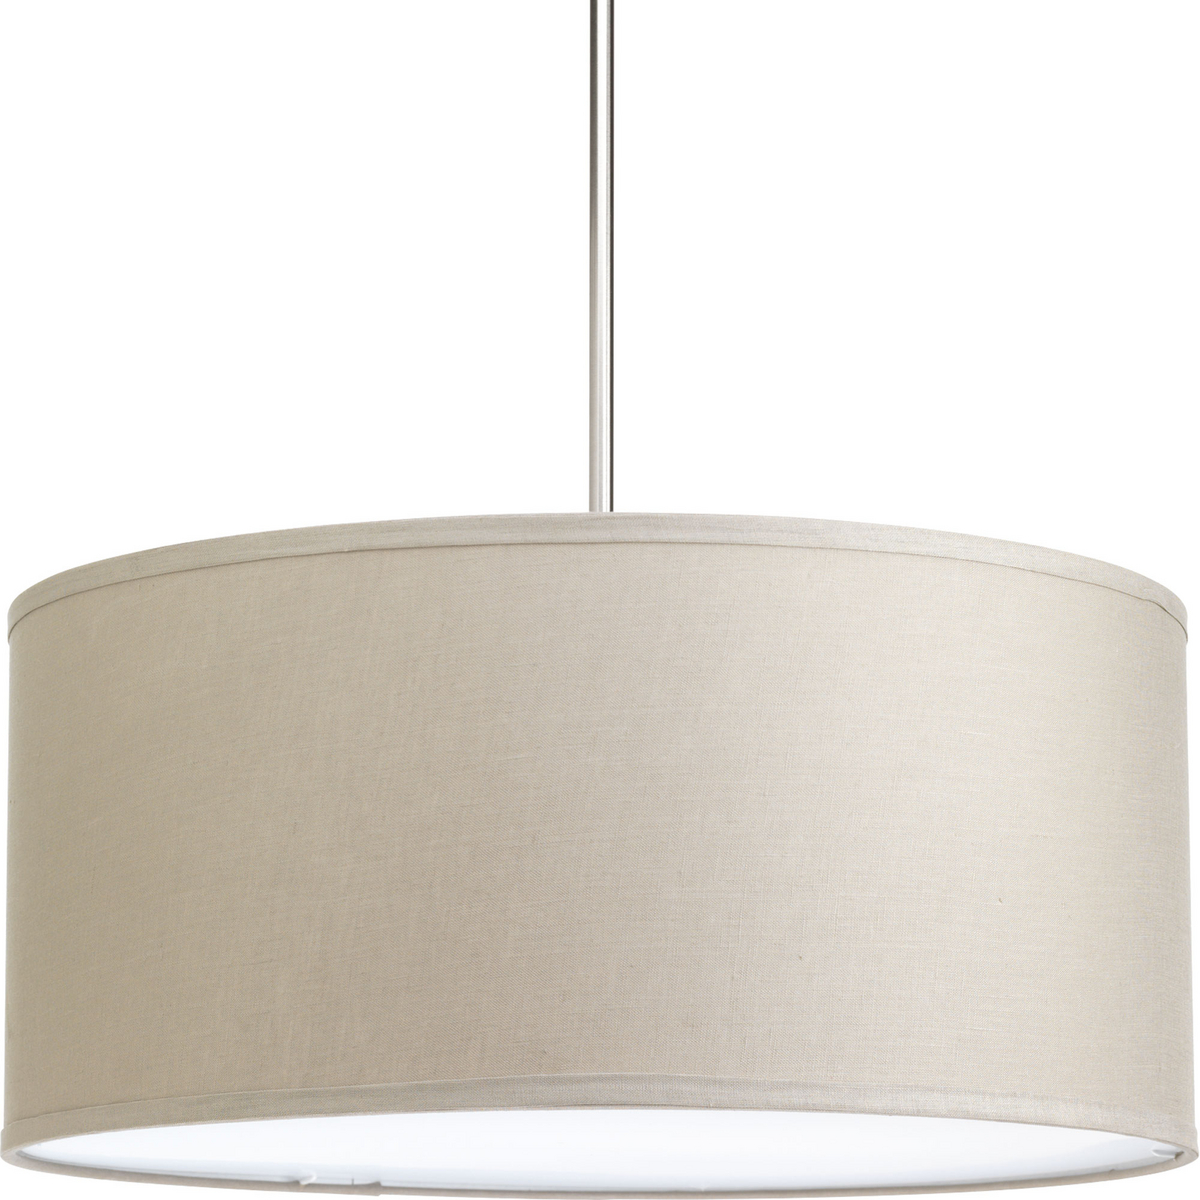 The Markor Series is a modular pendant system. The versatile series allow the choice of shades and stem kits. This 22 in shade with harvest linen fabric is inspired by mid-century design. Acrylic bottom diffuser. This shade can be used with a variety of stem kits from 1 to 3 light in CFL, LED and incandescent light sources.